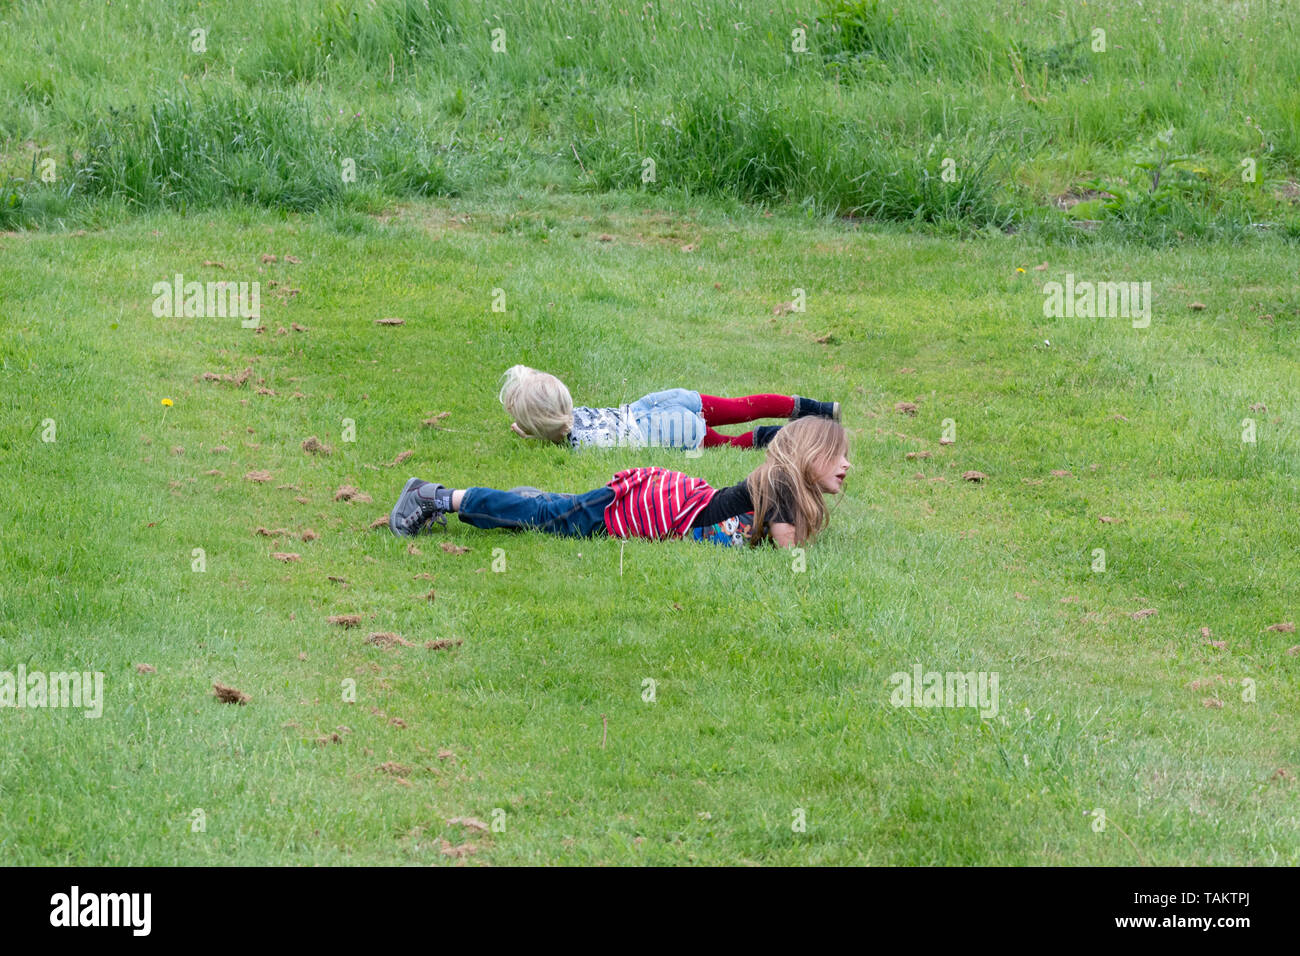 Kids Having Fun Rolling Down A Grassy Hill Stock Photo, Picture